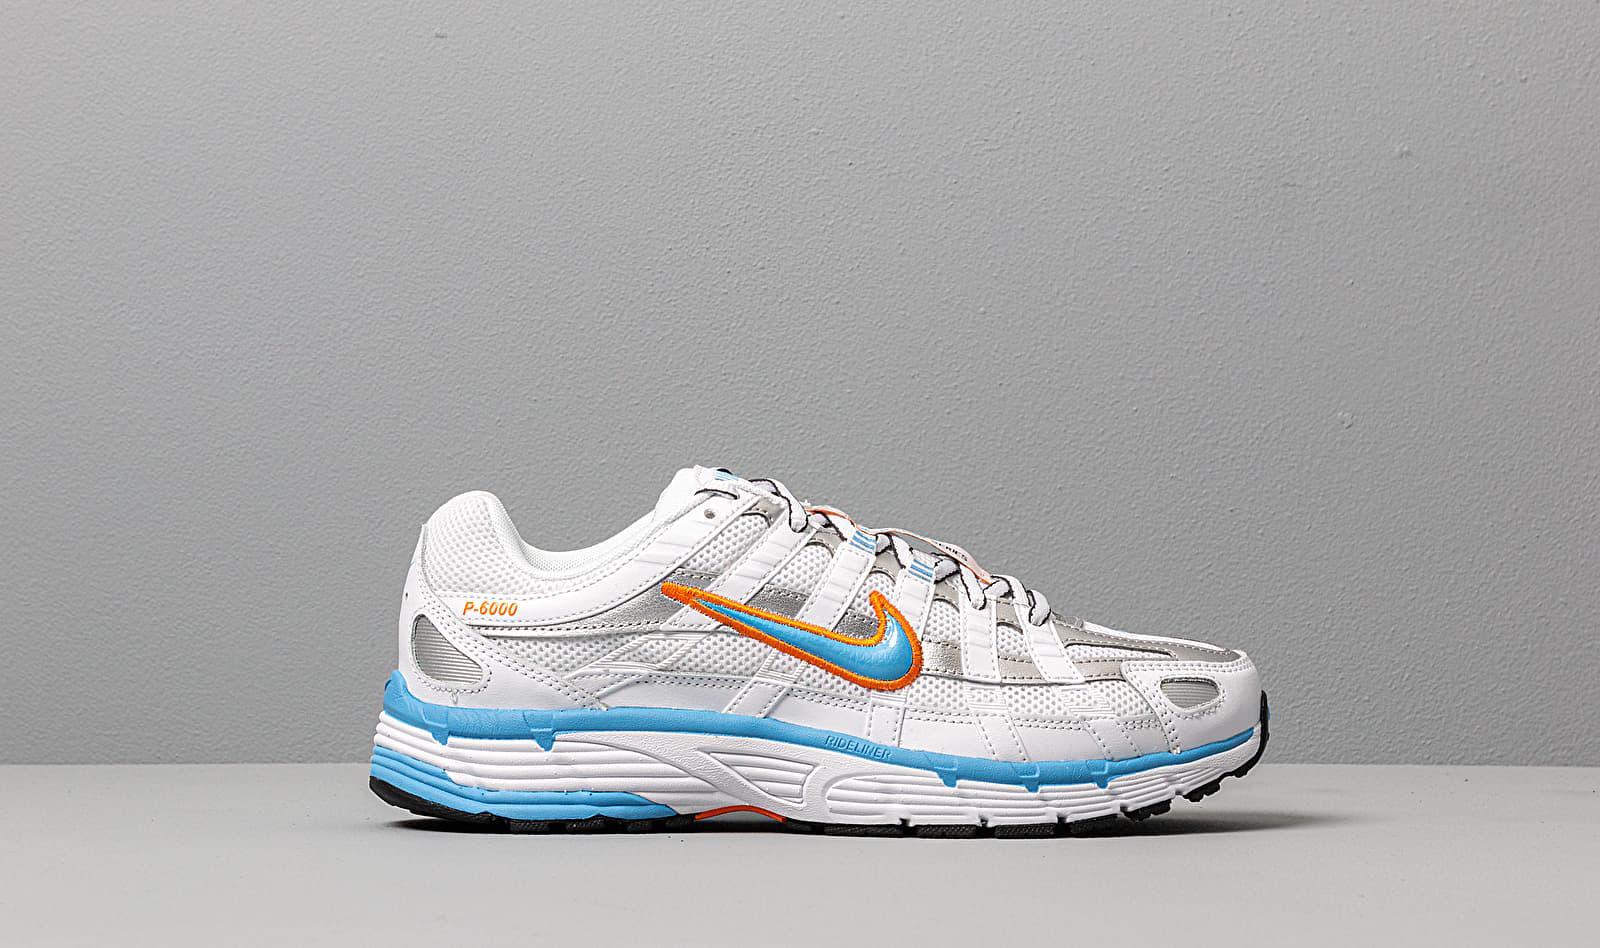 Nike Rubber White And Metallic Blue P-6000 Trainers | Lyst